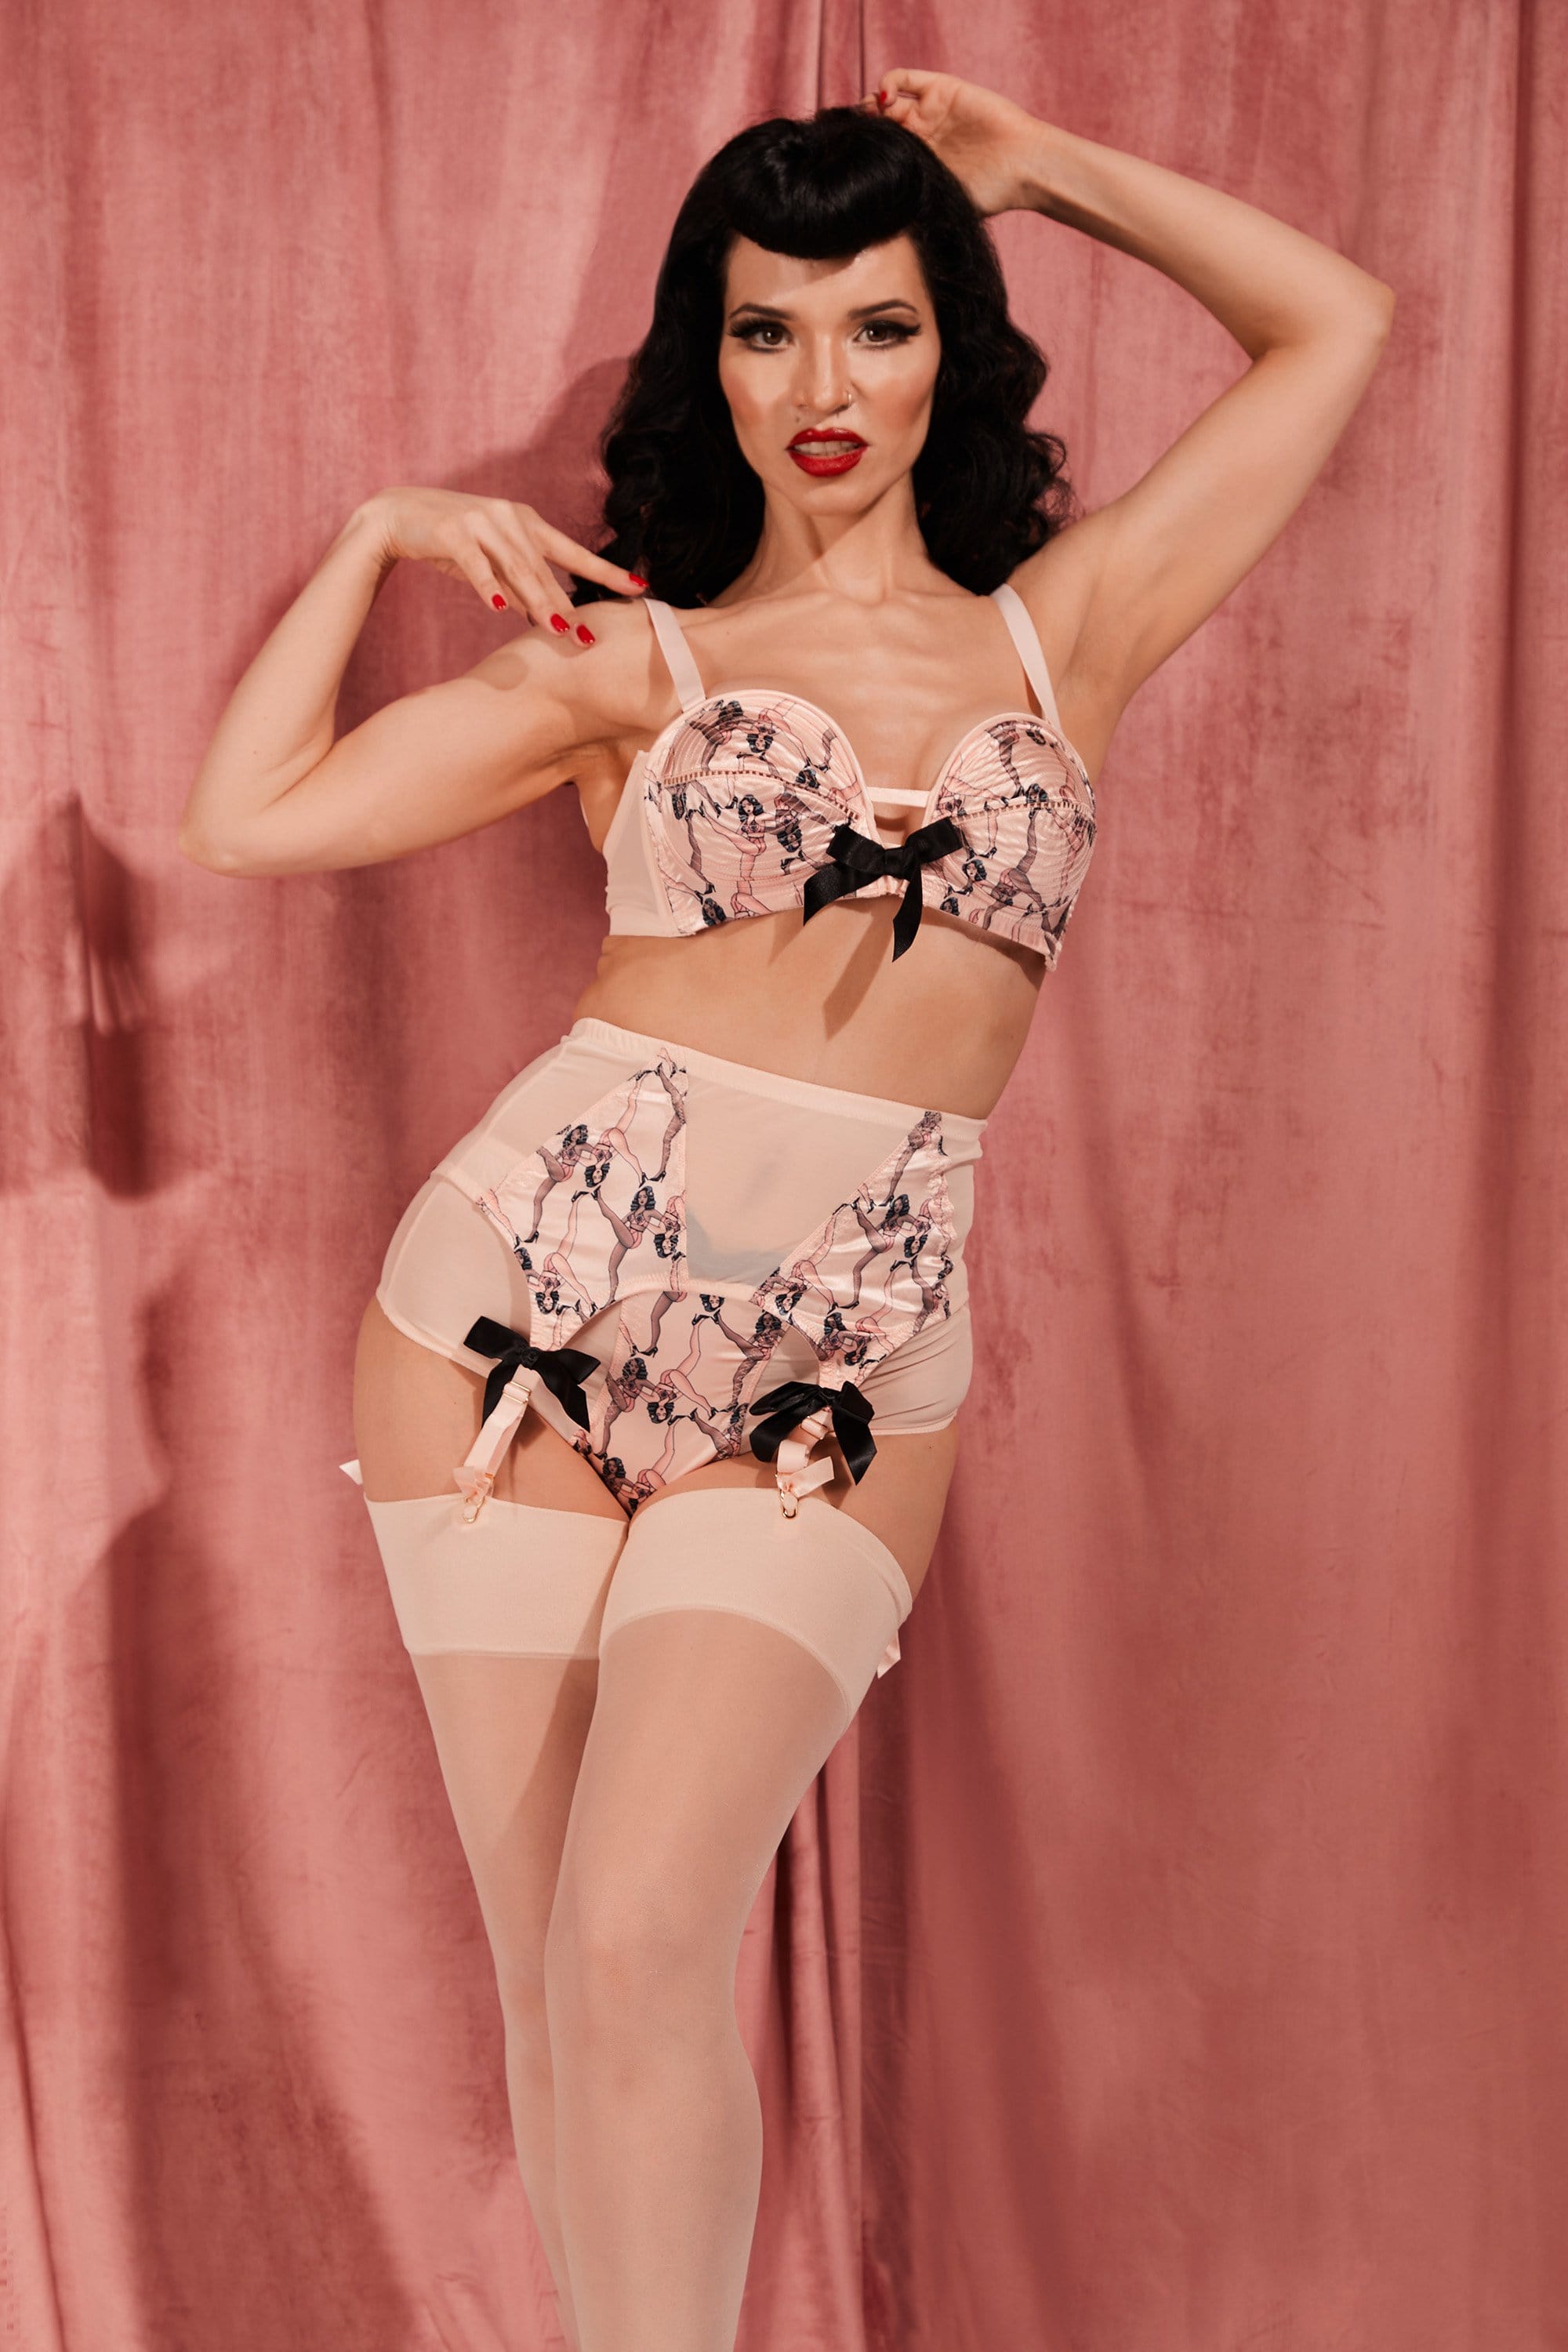 Retro fifties pin-up attractive girl in vintage lingerie Stock